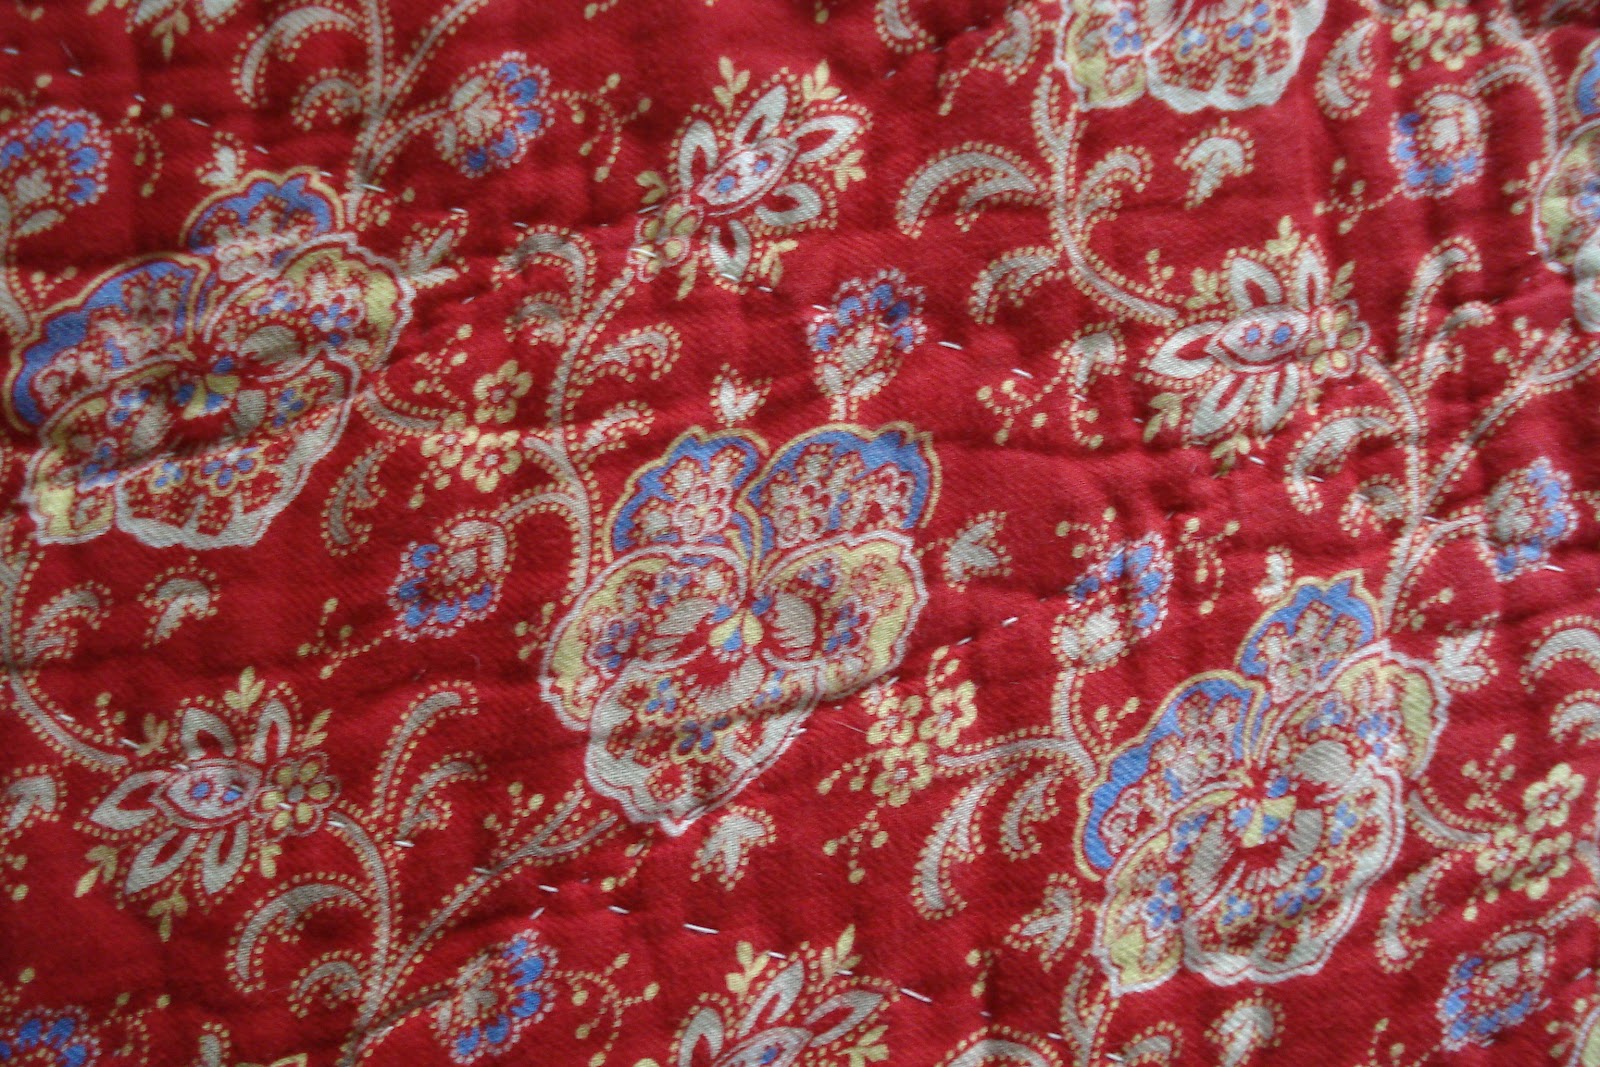 Welsh Quilts: Paisley Quilt from Devon